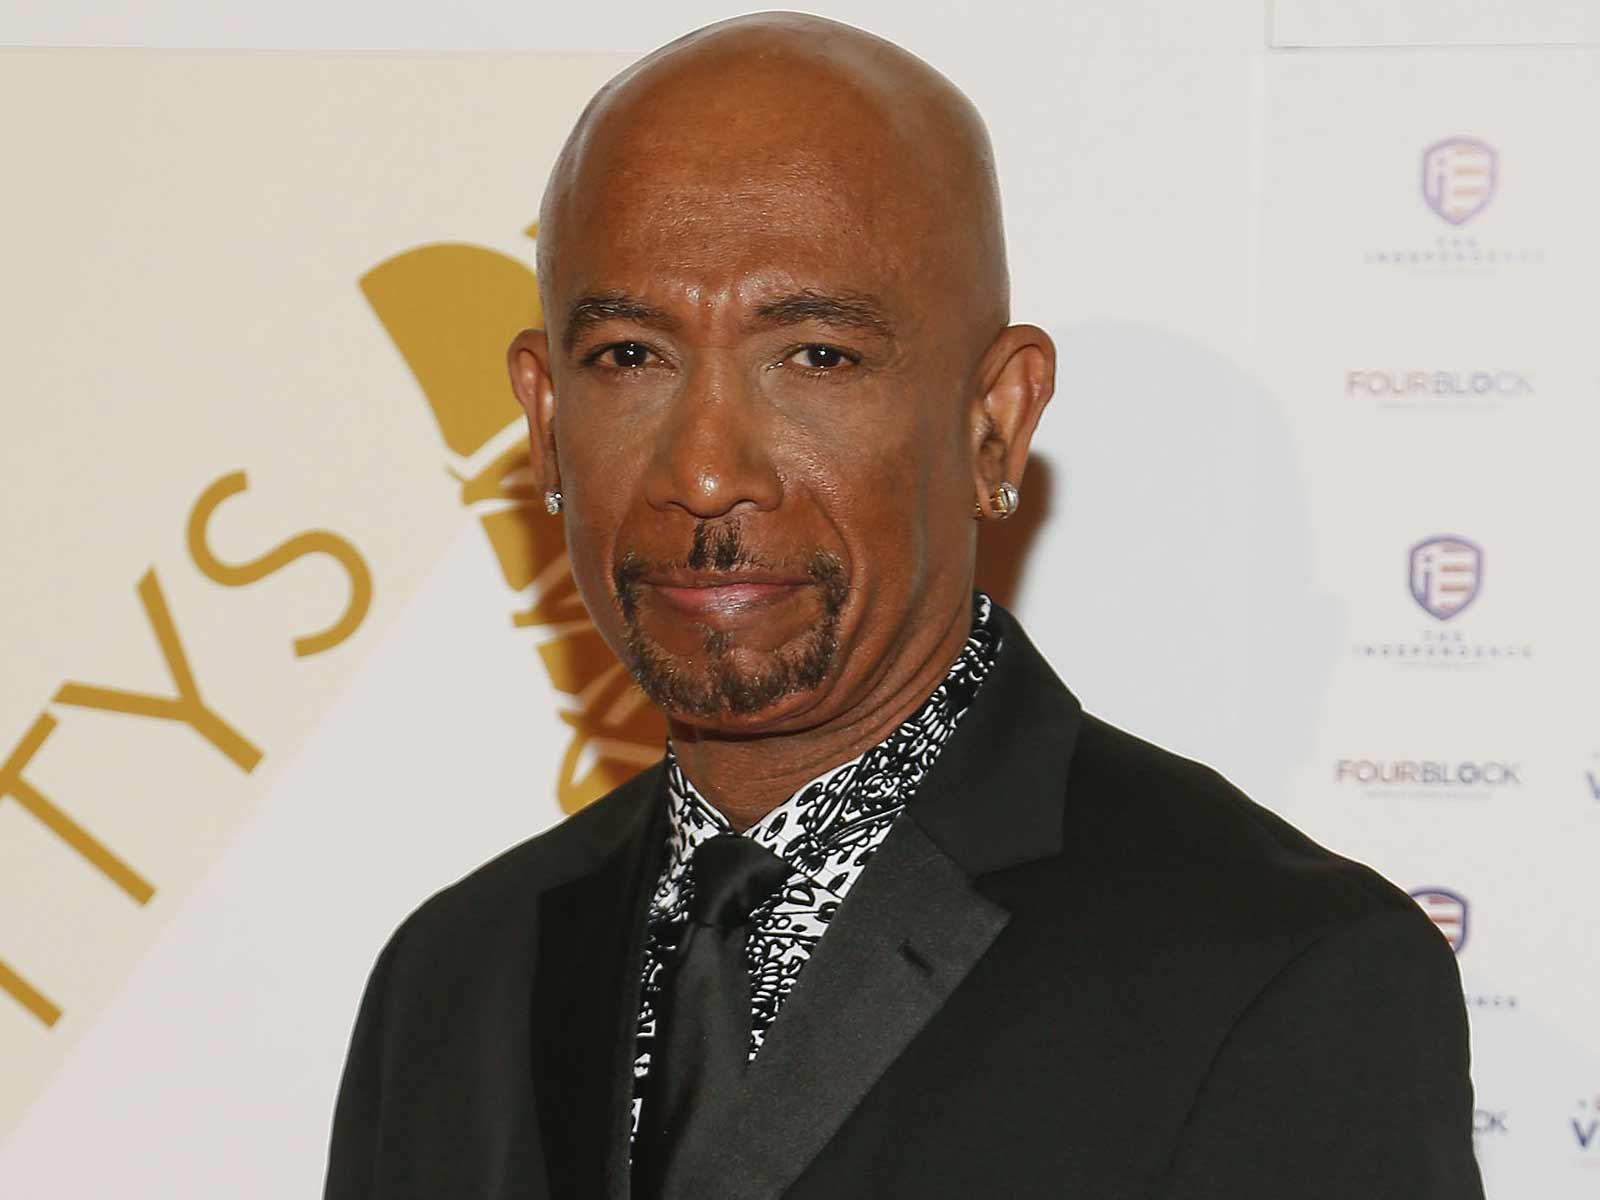 Montel Williams Spent 21 Days in the Hospital Following Hemorrhagic Stroke: ‘I Almost Died’